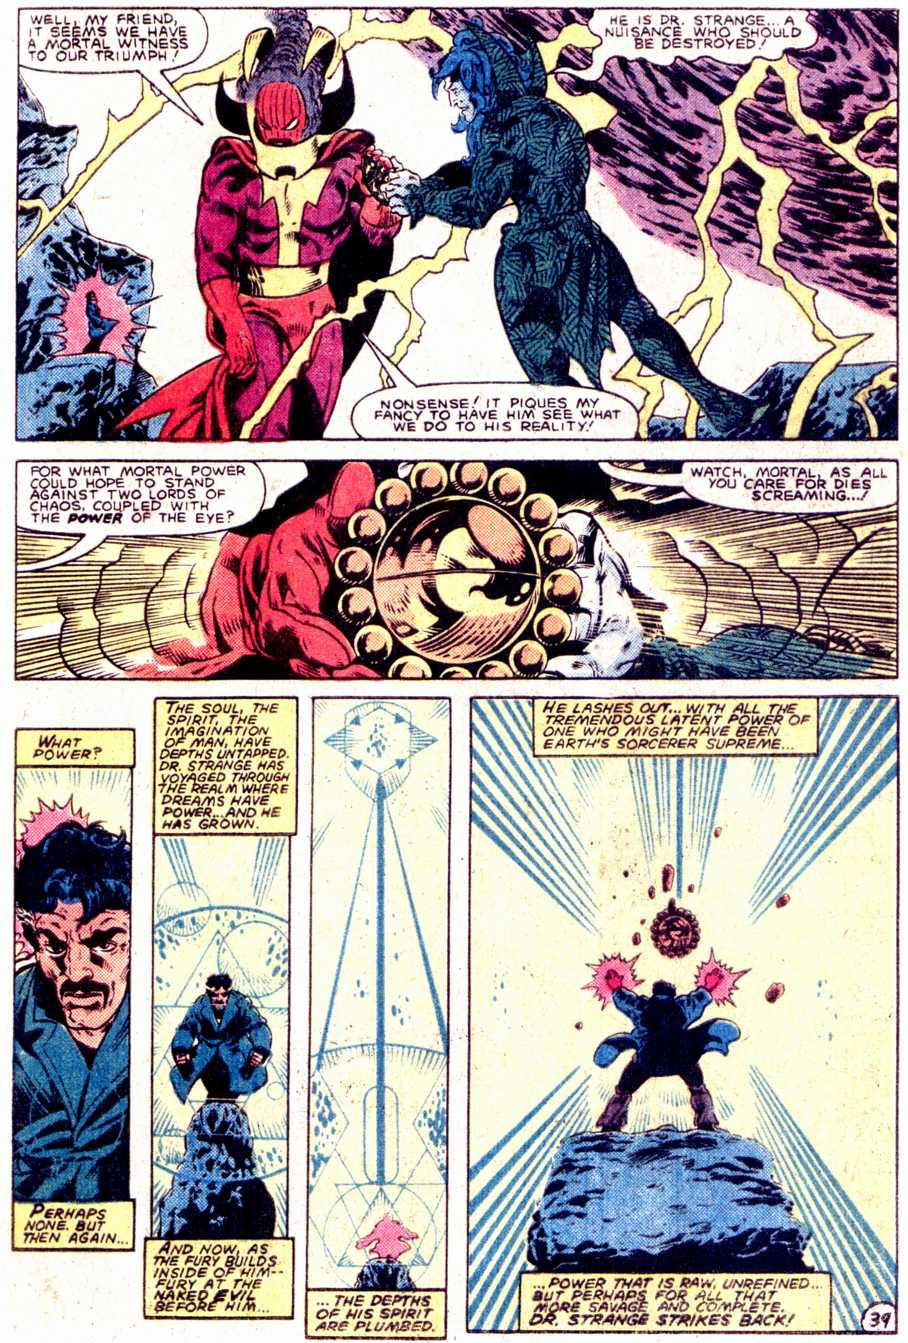 What If? (1977) #40_-_Dr_Strange_had_not_become_master_of_The_mystic_arts #40 - English 40